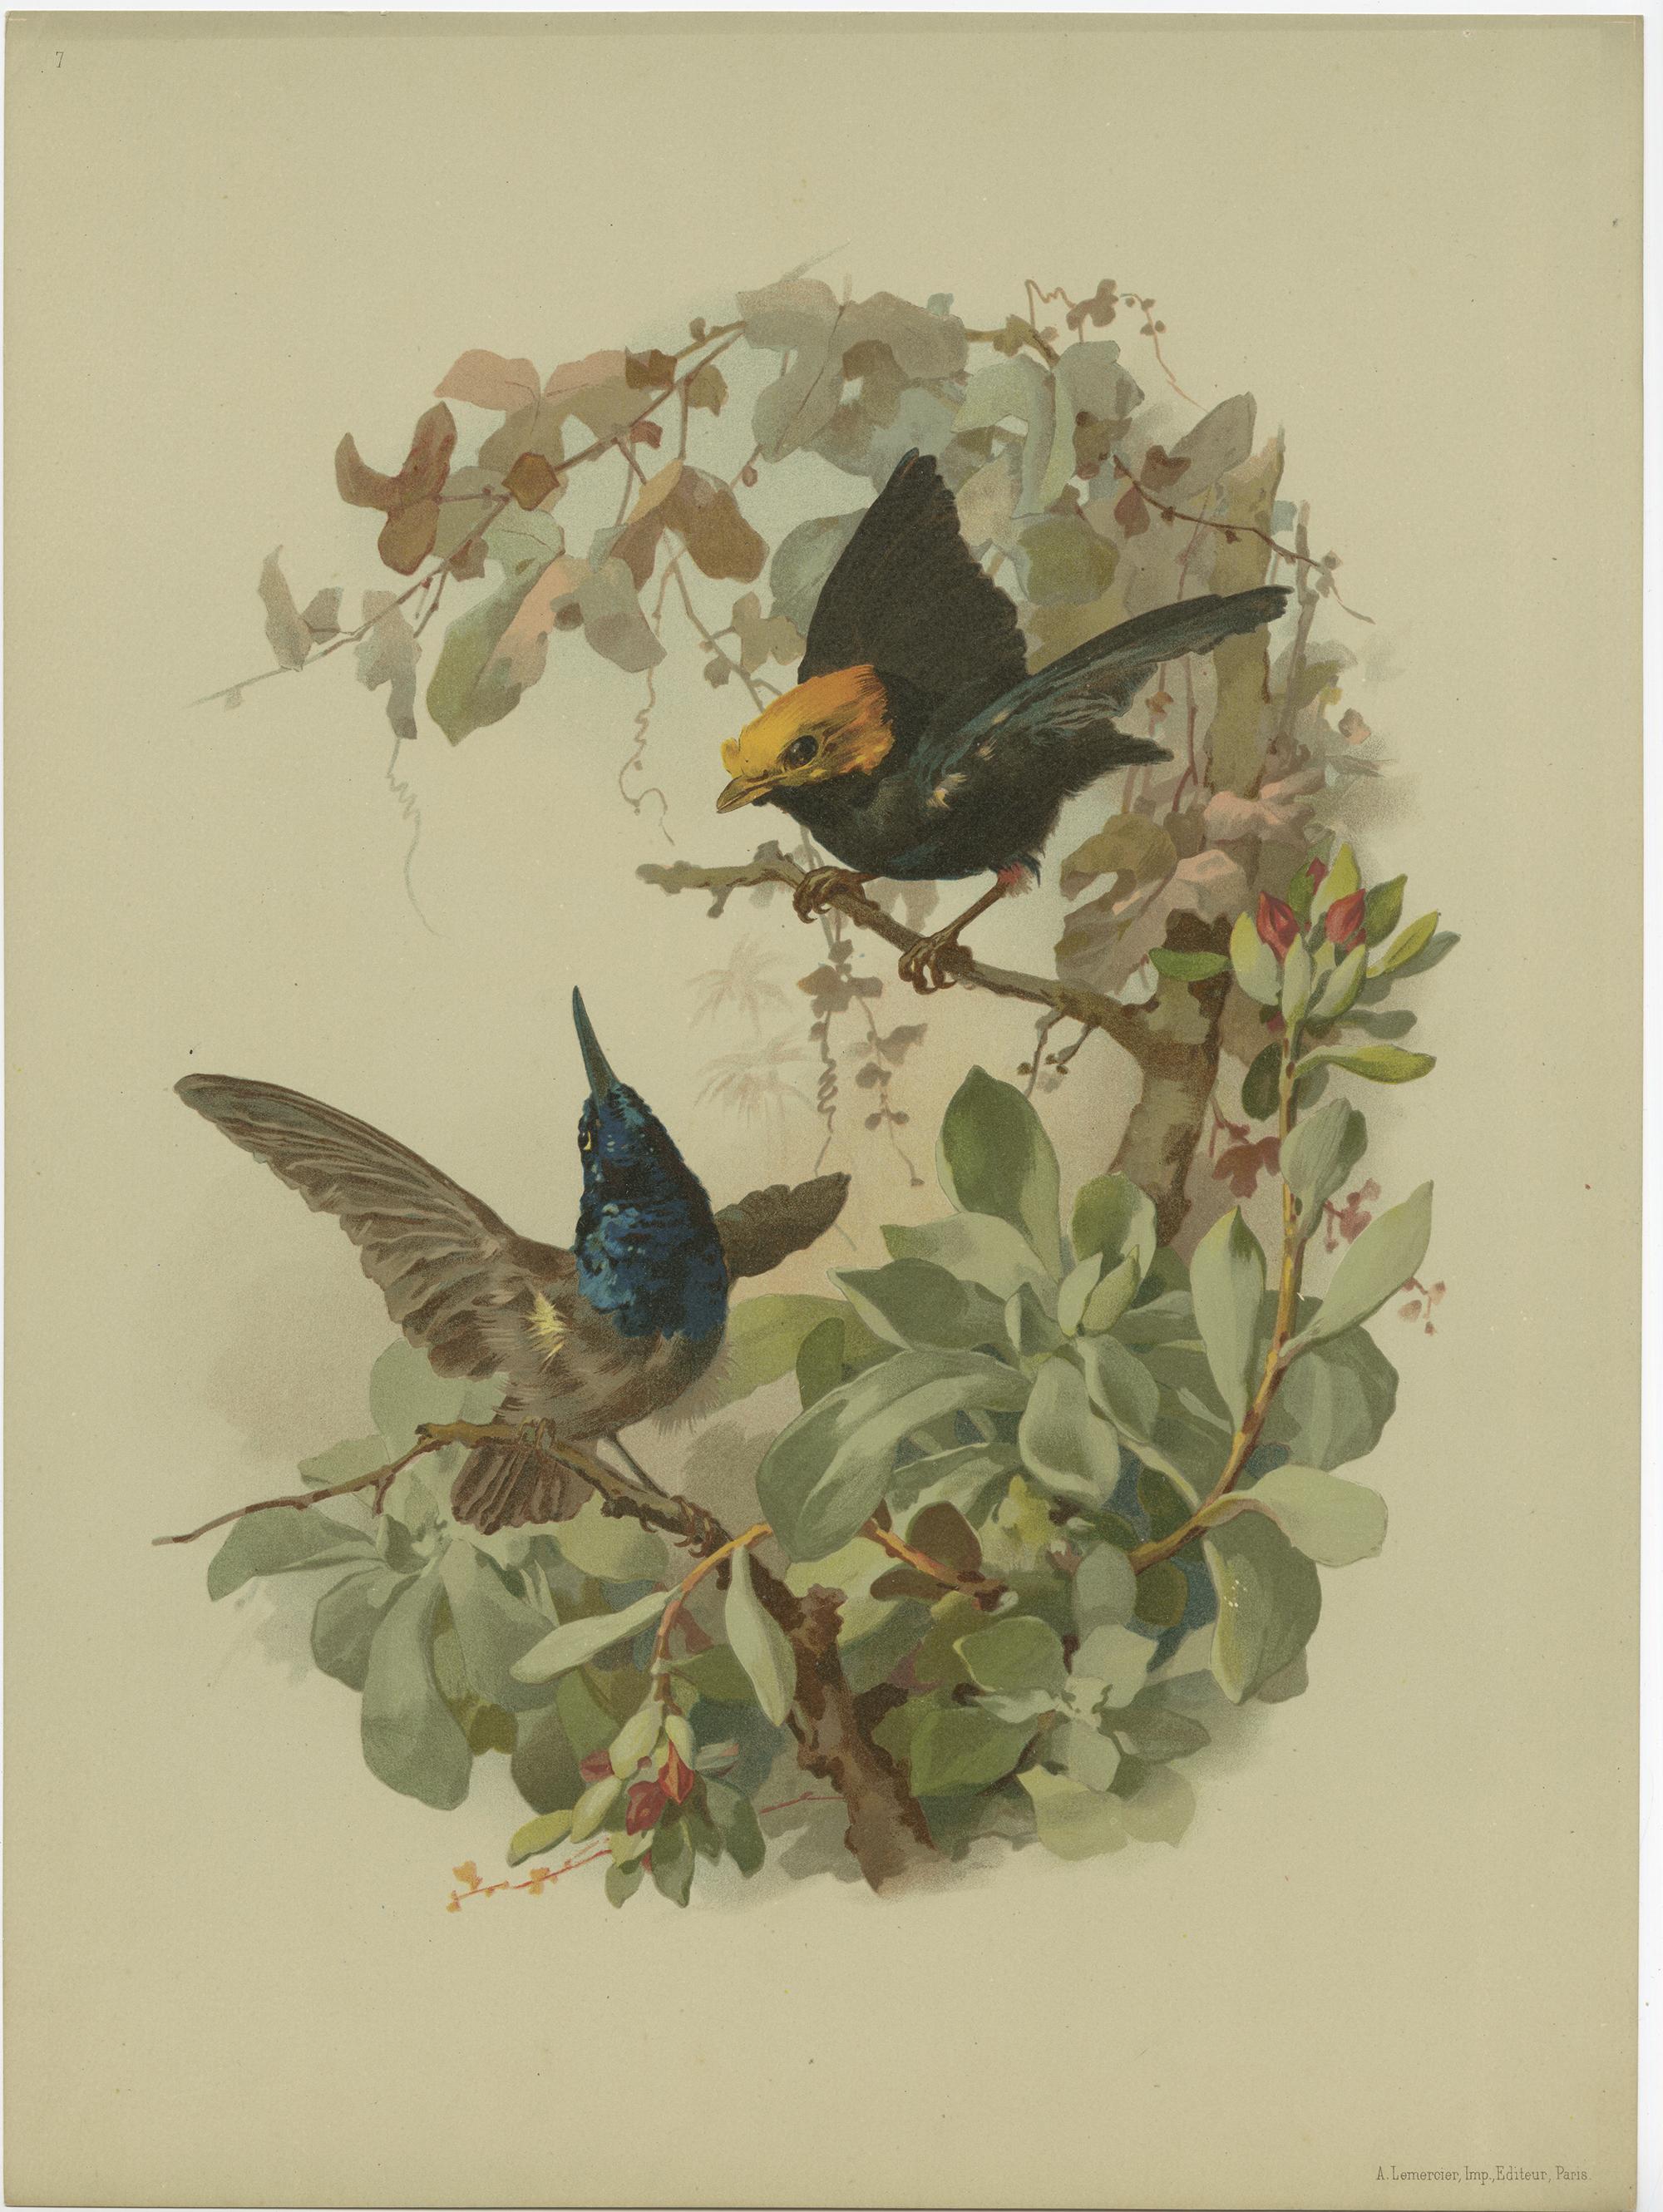 Paper Set of 9 Antique Prints of various Birds, Plants and Trees by Lemercier 'c.1890' For Sale